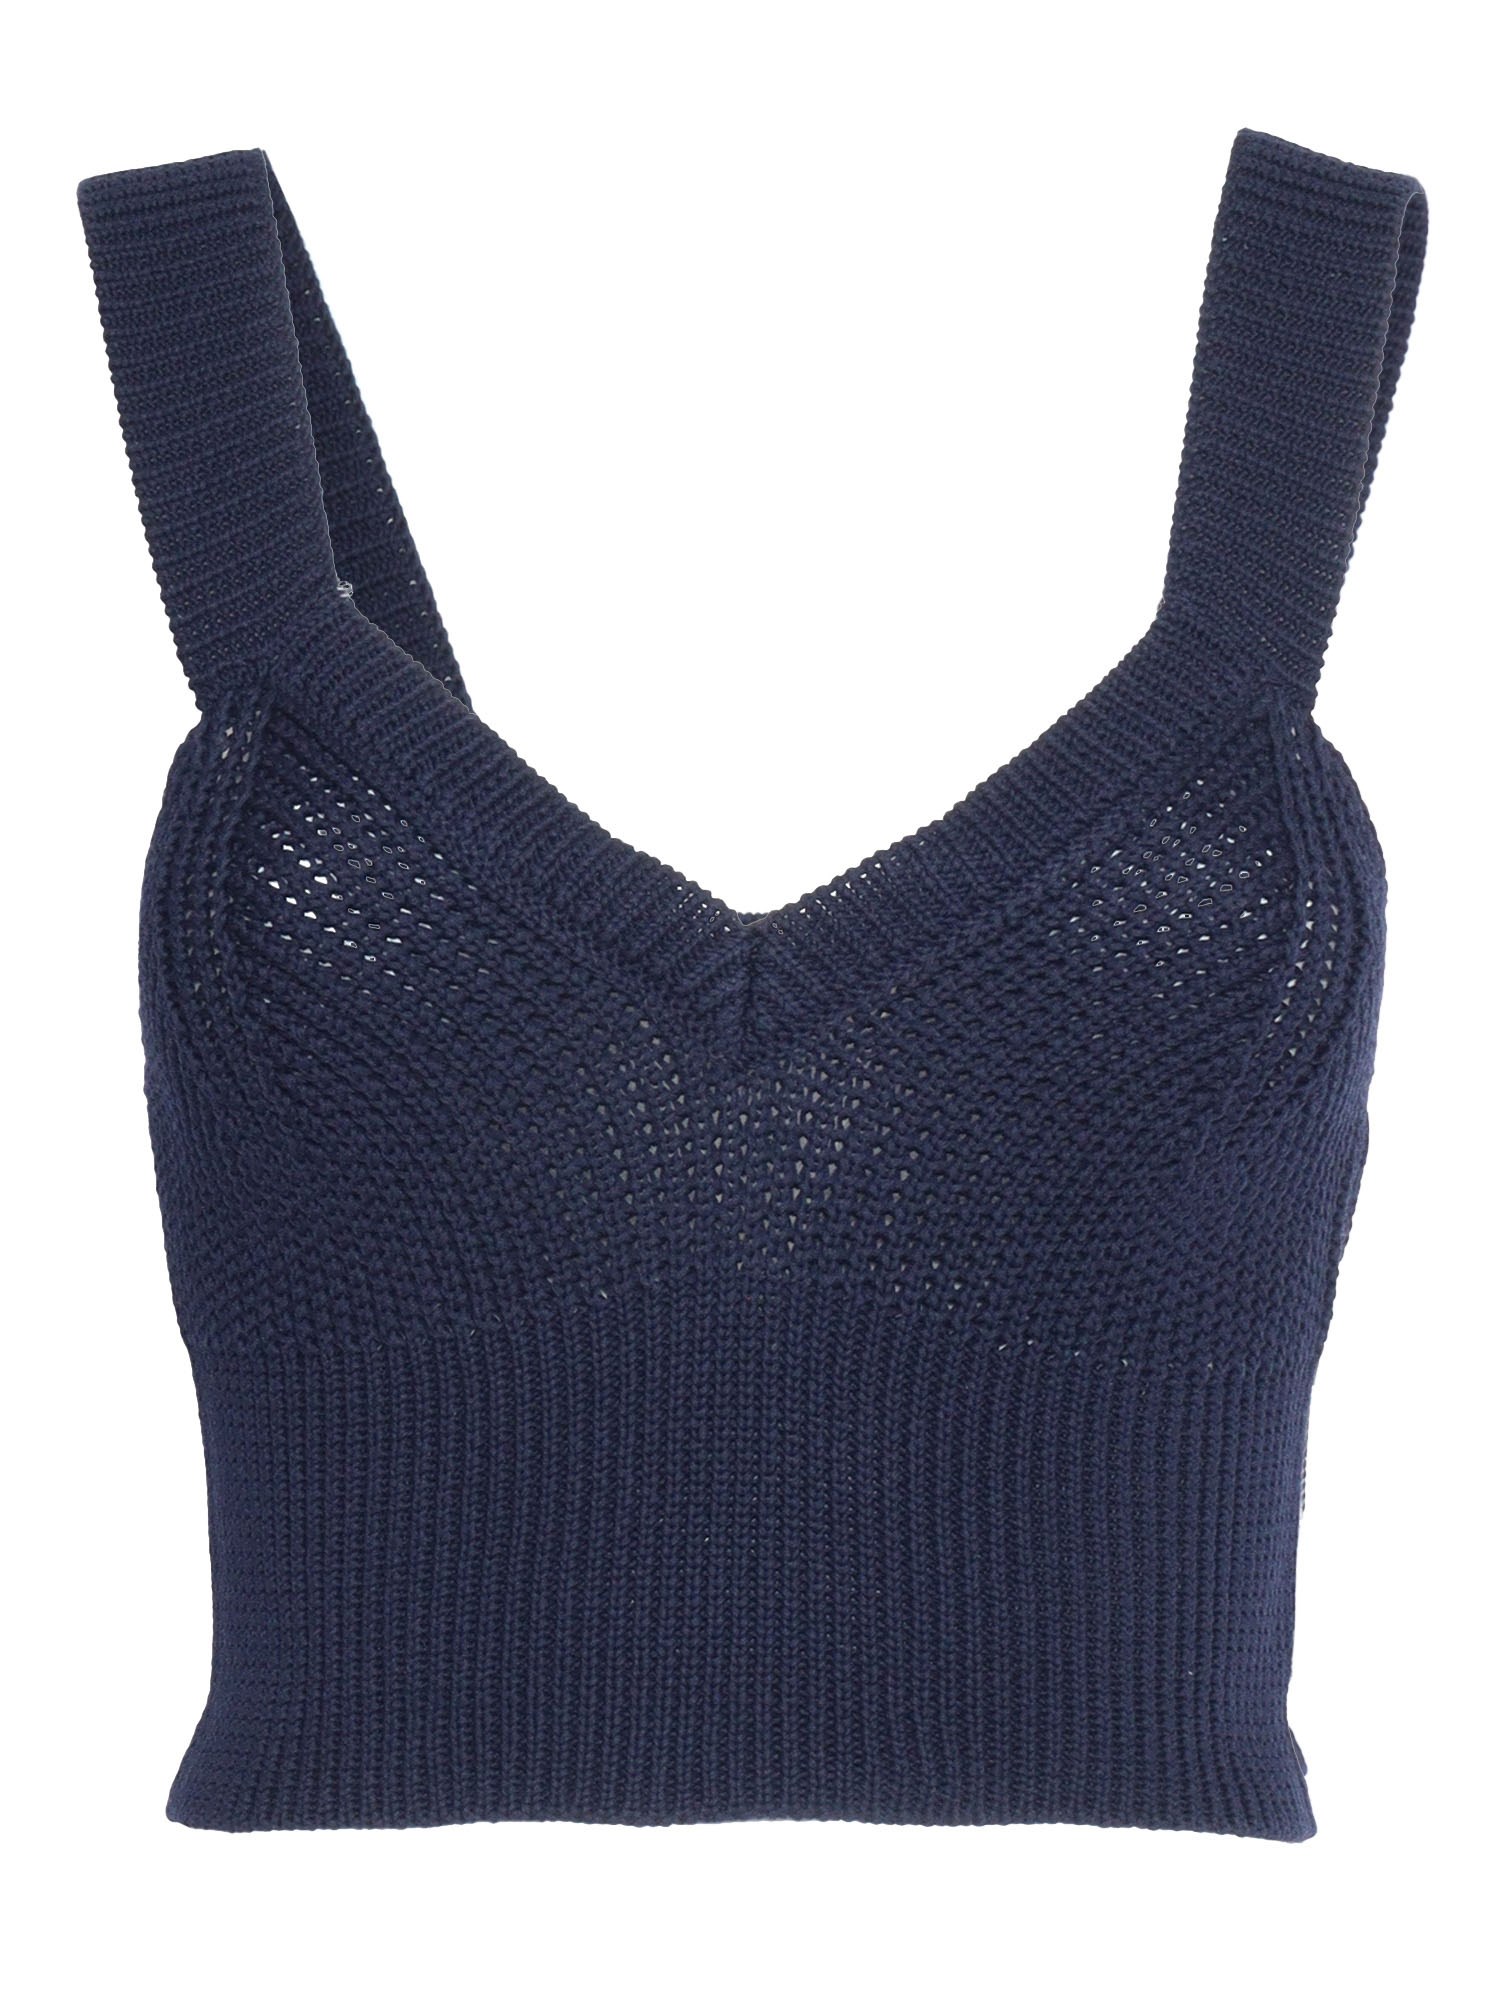 Ballantyne Perforated Blue Top